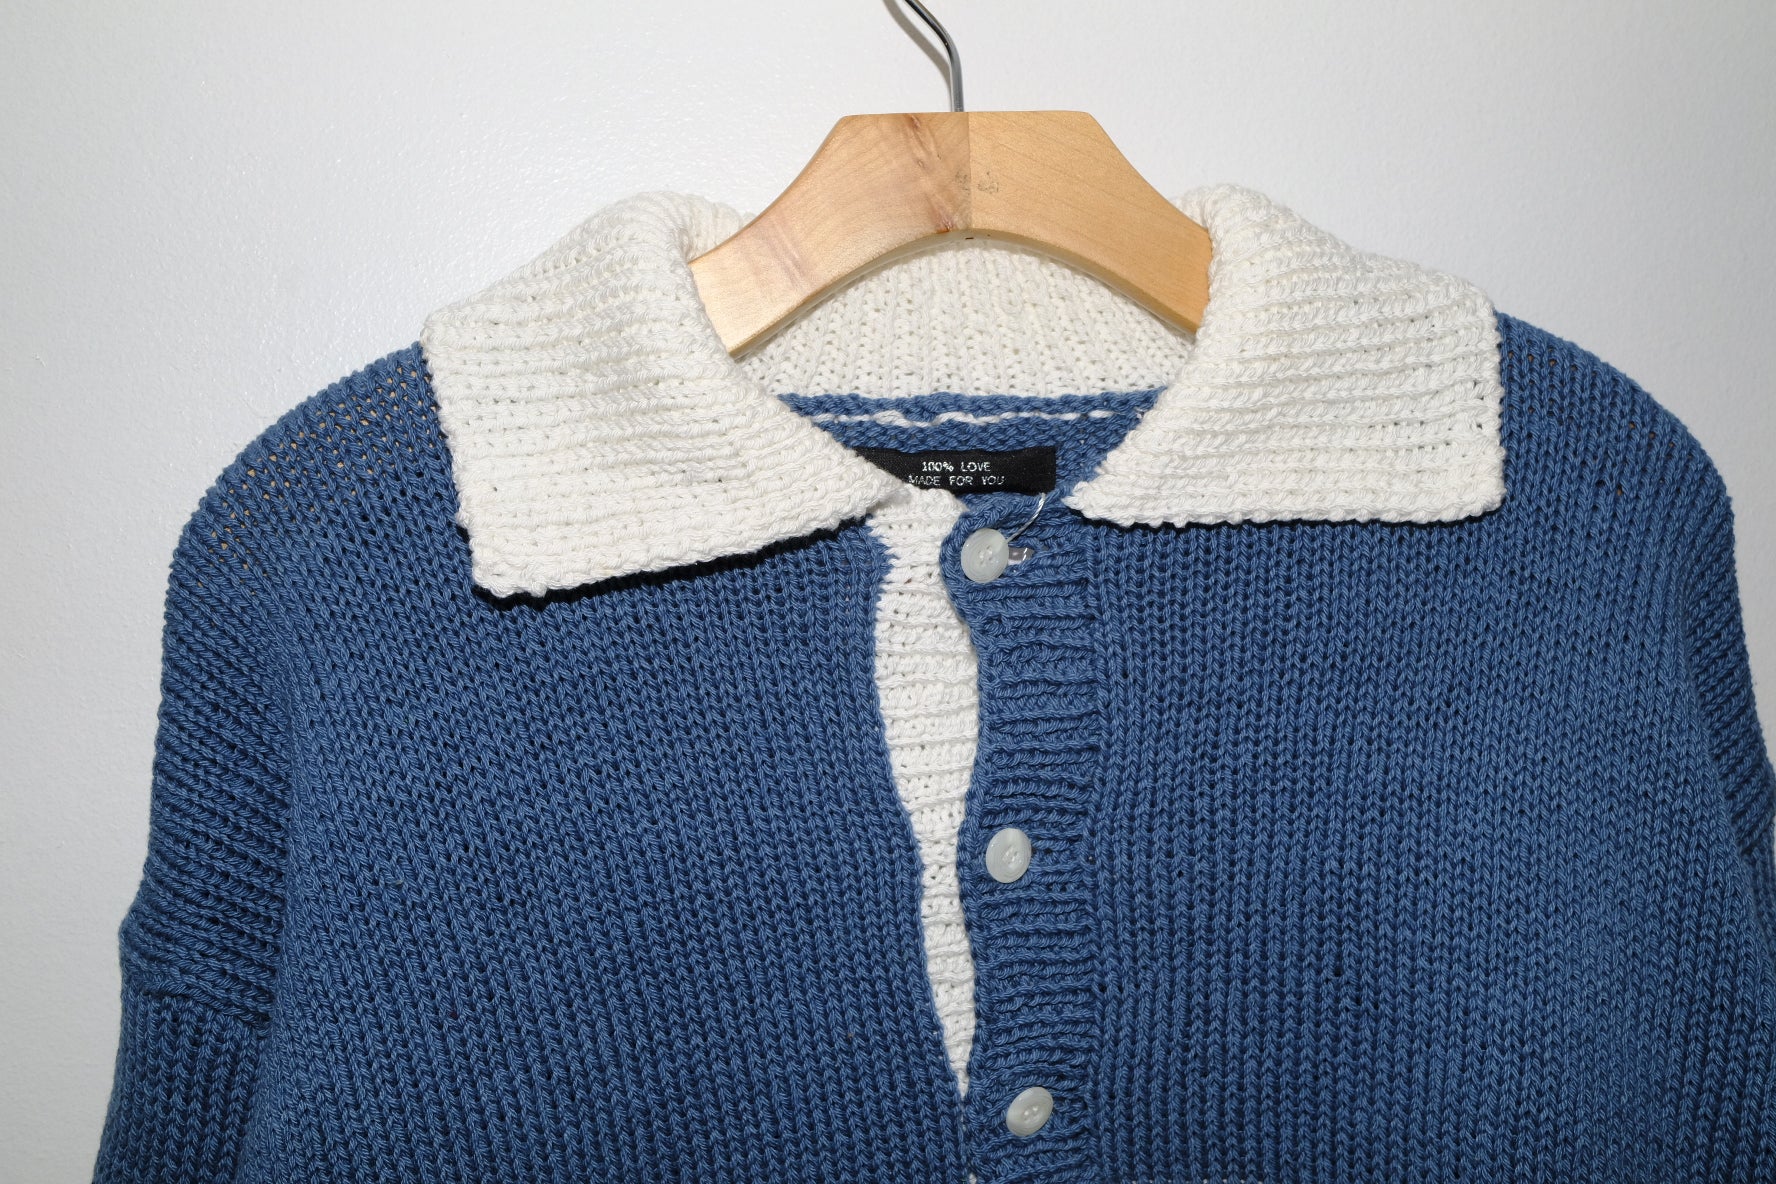 hand knitting rugby shirt in ocean blue